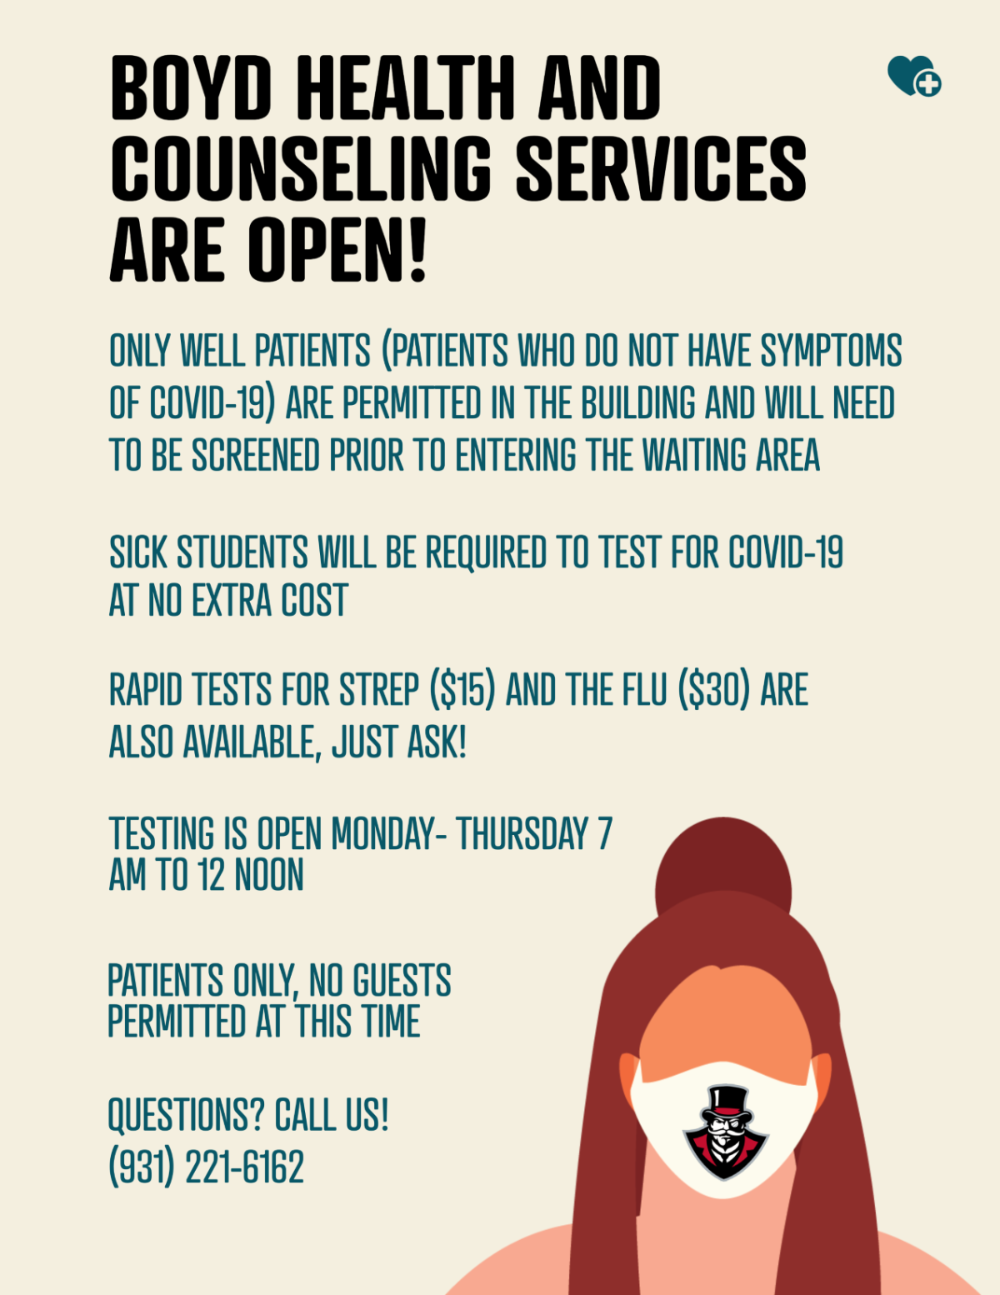 BHS and Counseling is open. Only well patients (without covid symptoms) are permitted in the building and will need to be screened prior to entering. Sick students will be required to test for covid-19 at no extra cost. rapid tests for strep ($15) and flu tests ($30) are also available, just ask! Testing is open Monday-Thursday 7 am - 12 noon. Patients only, no guests permitted at this time